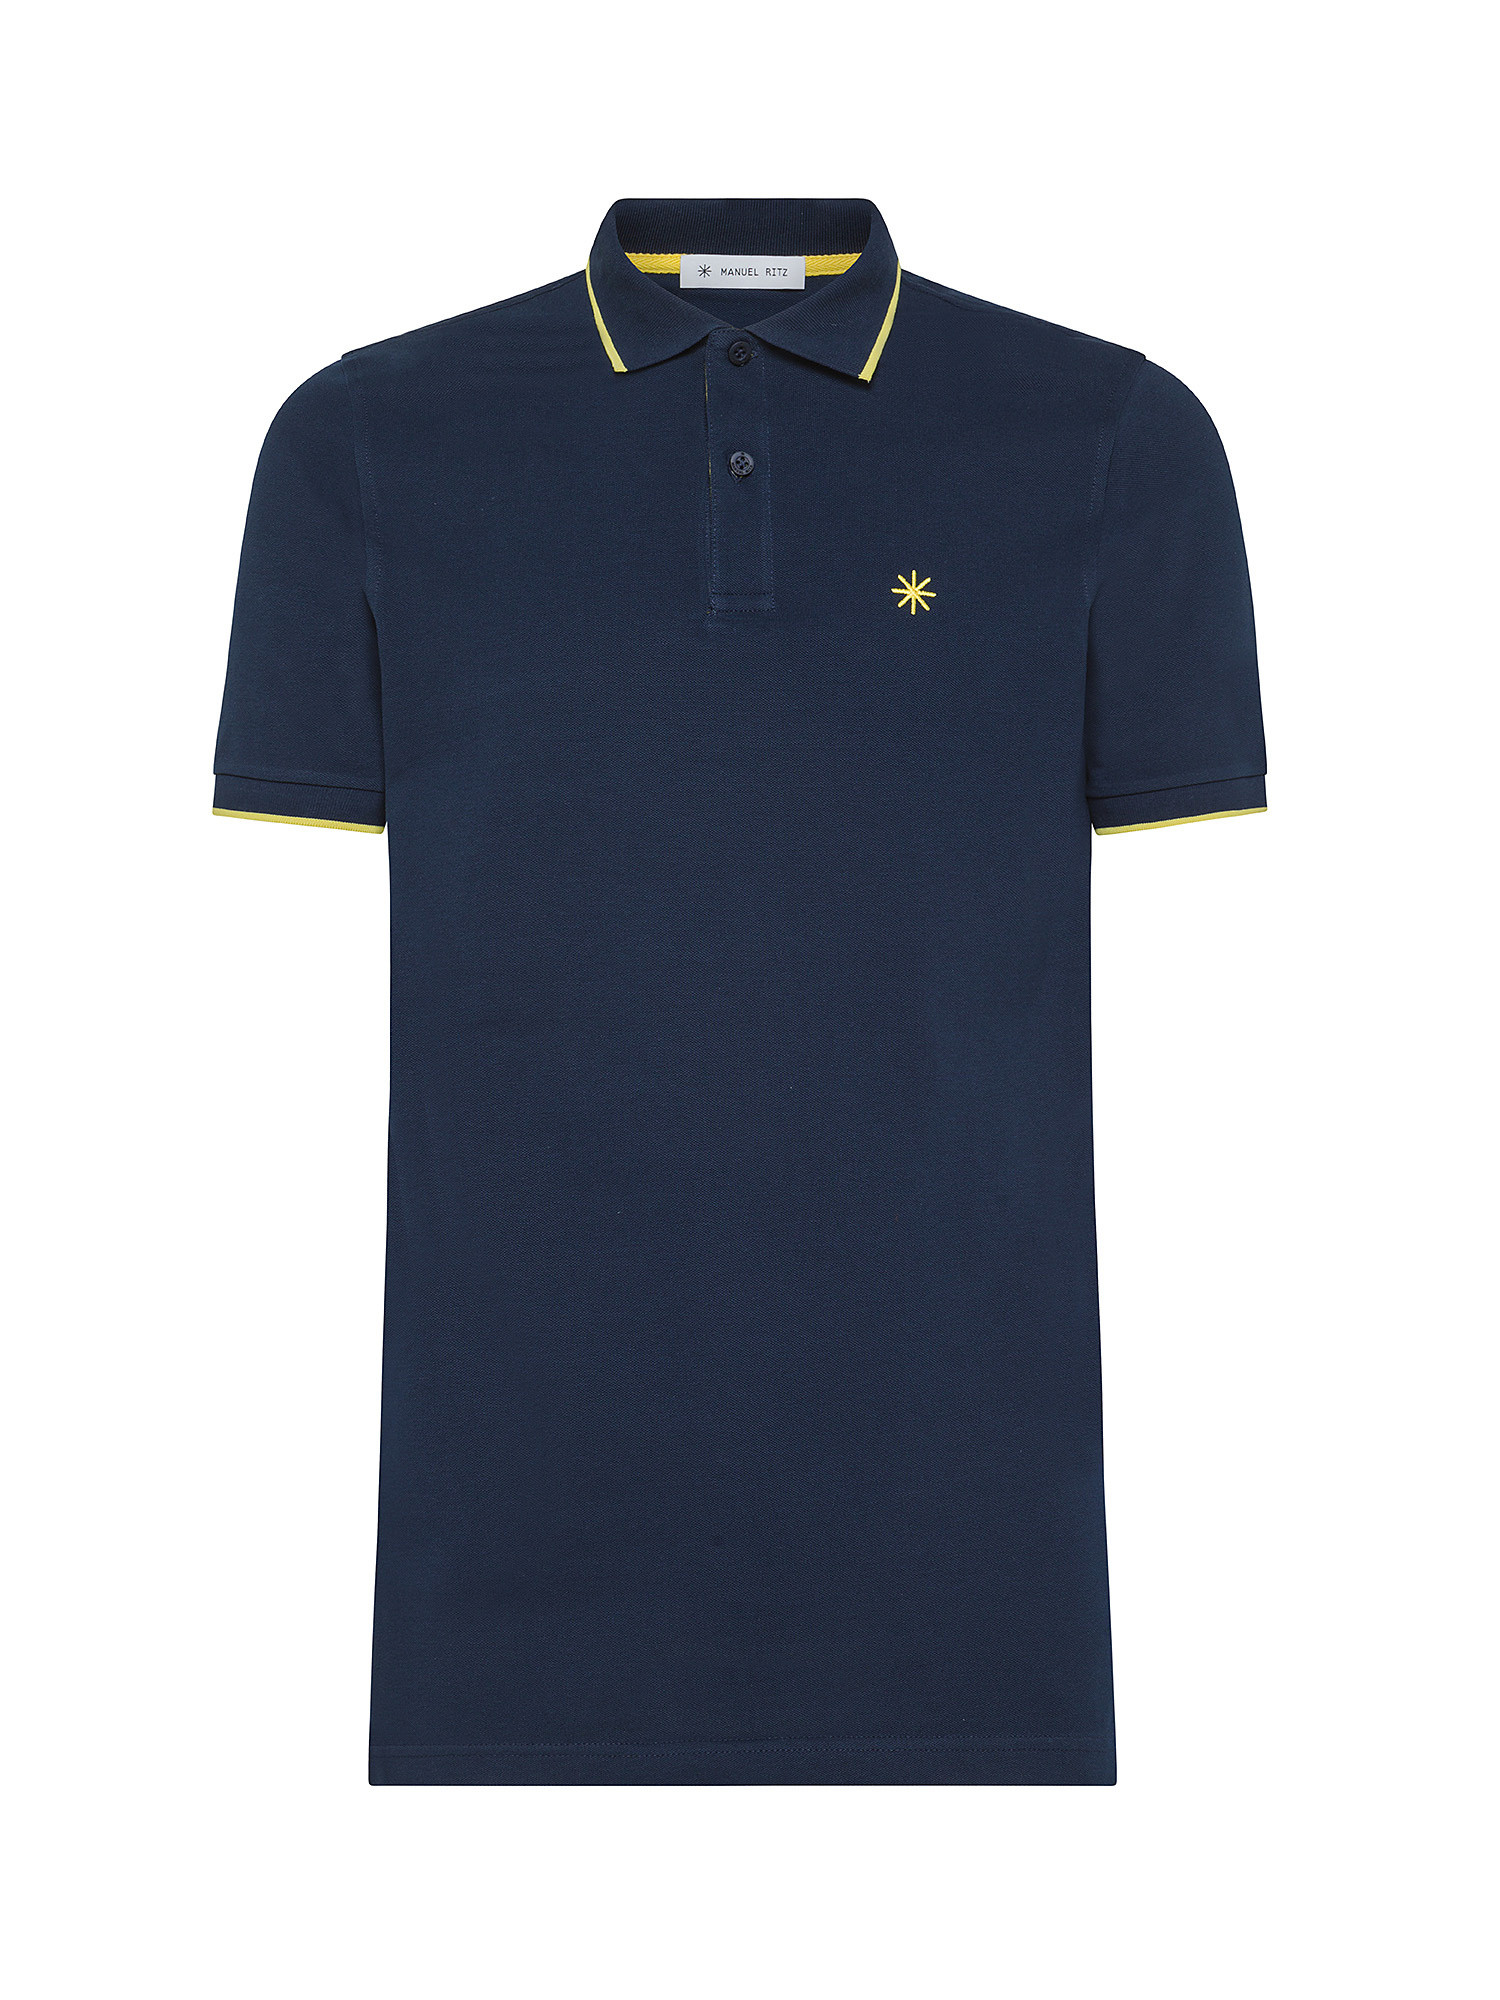 Manuel Ritz - Polo with contrasting edges and logo, Dark Blue, large image number 0